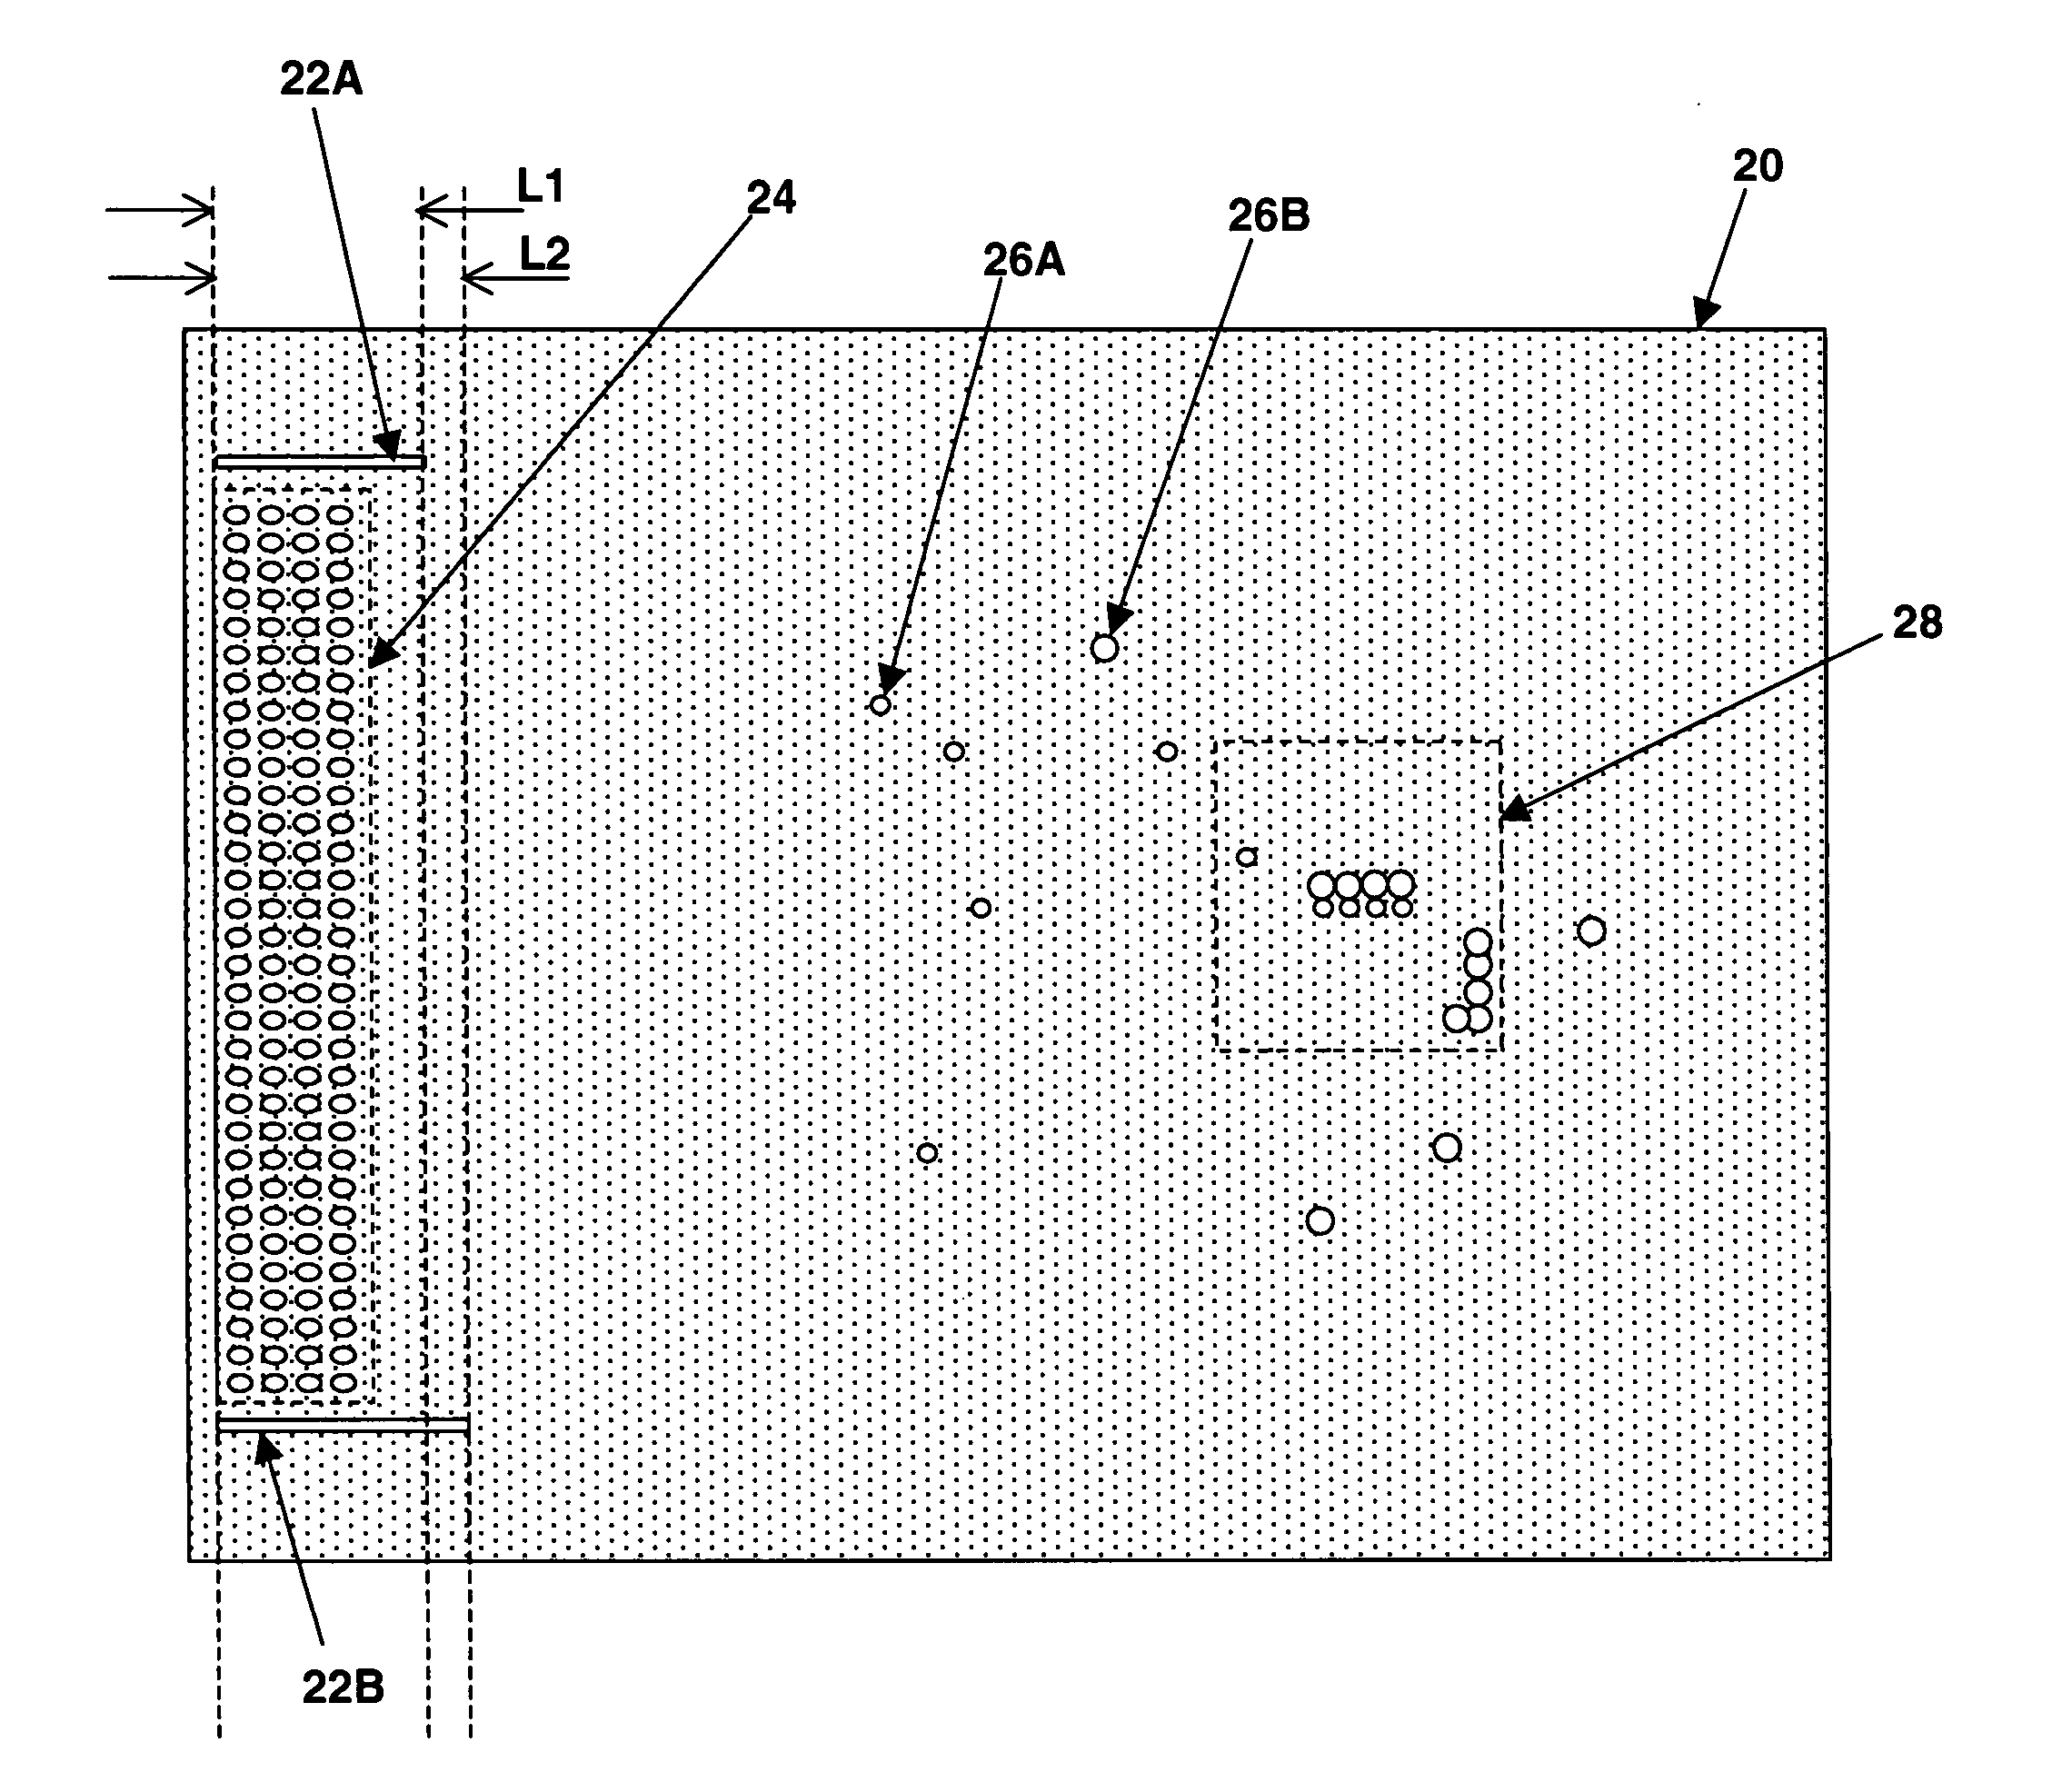 Method and apparatus for balancing power plane pin currents in a printed wiring board